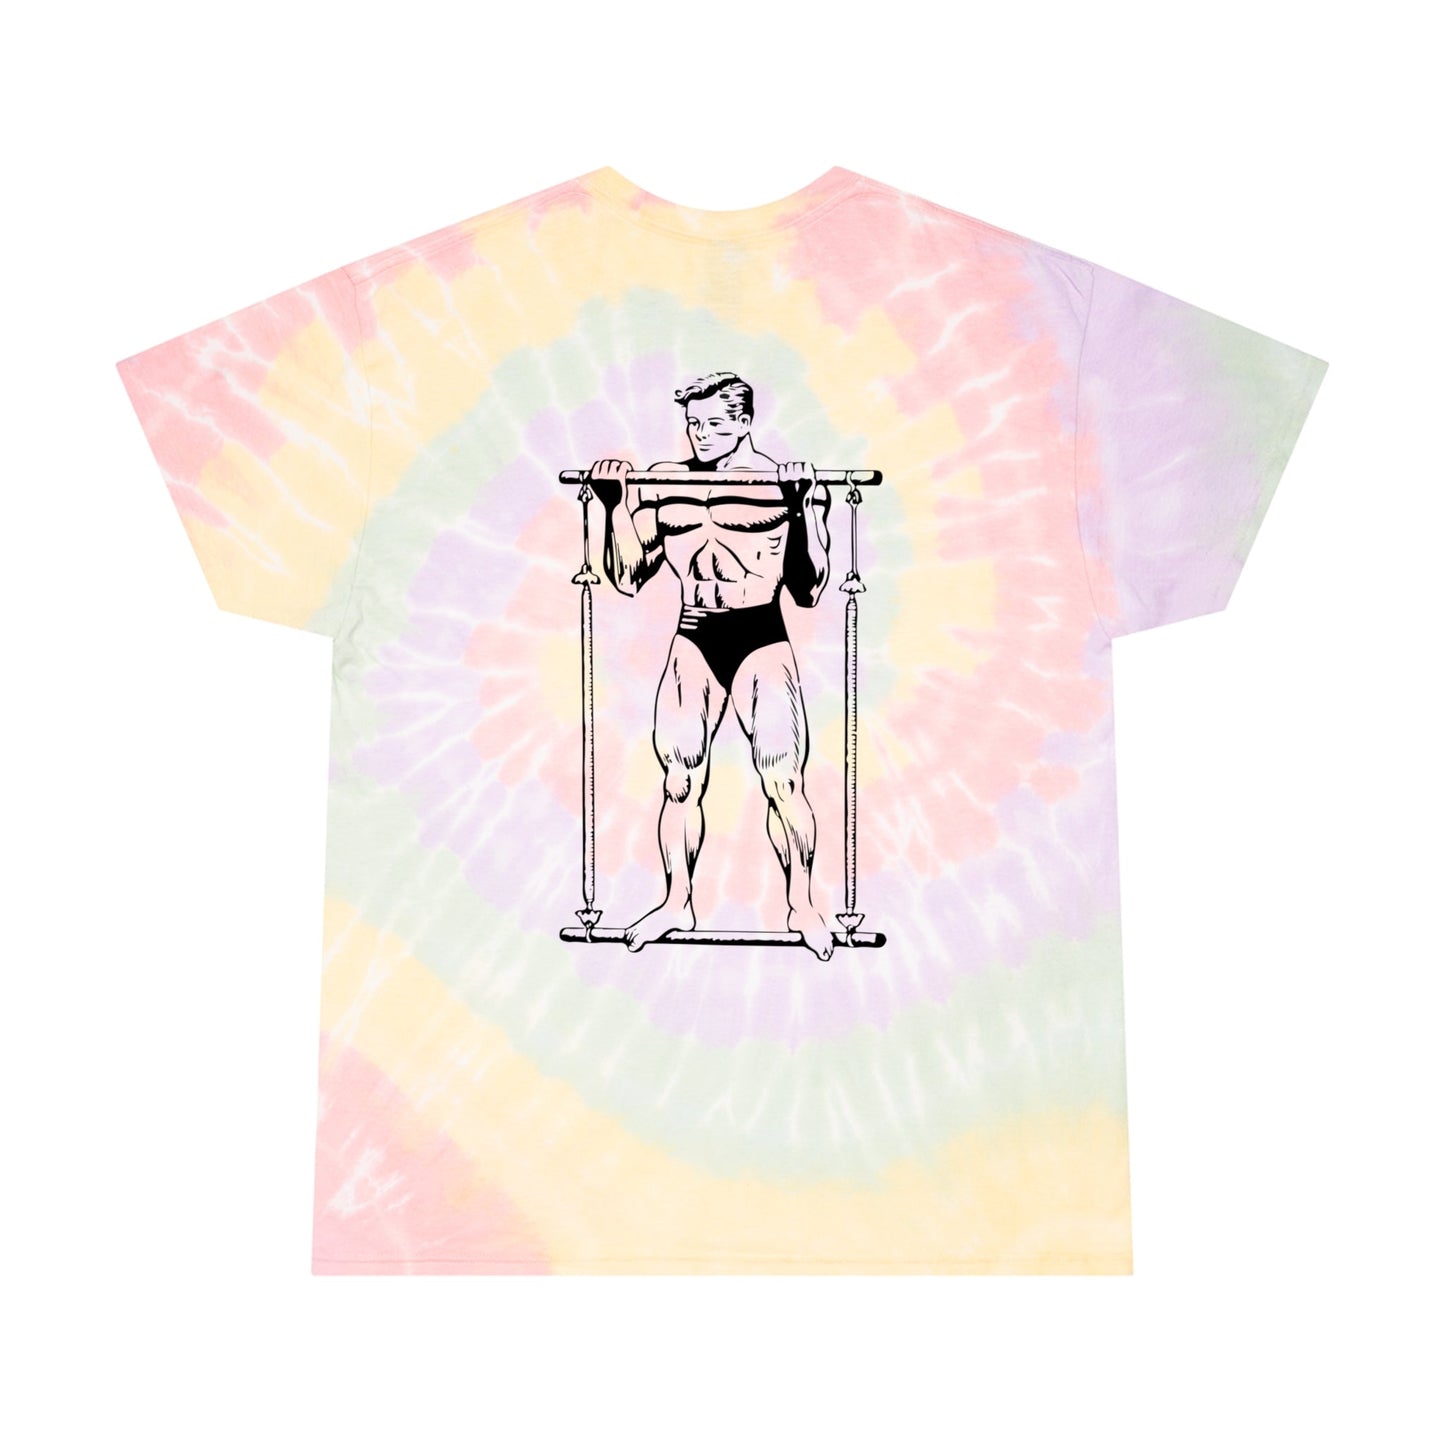 "Sounds Gay, I'm In!" Tie-Dye Tee | Outfique | T-Shirt | Crew neck